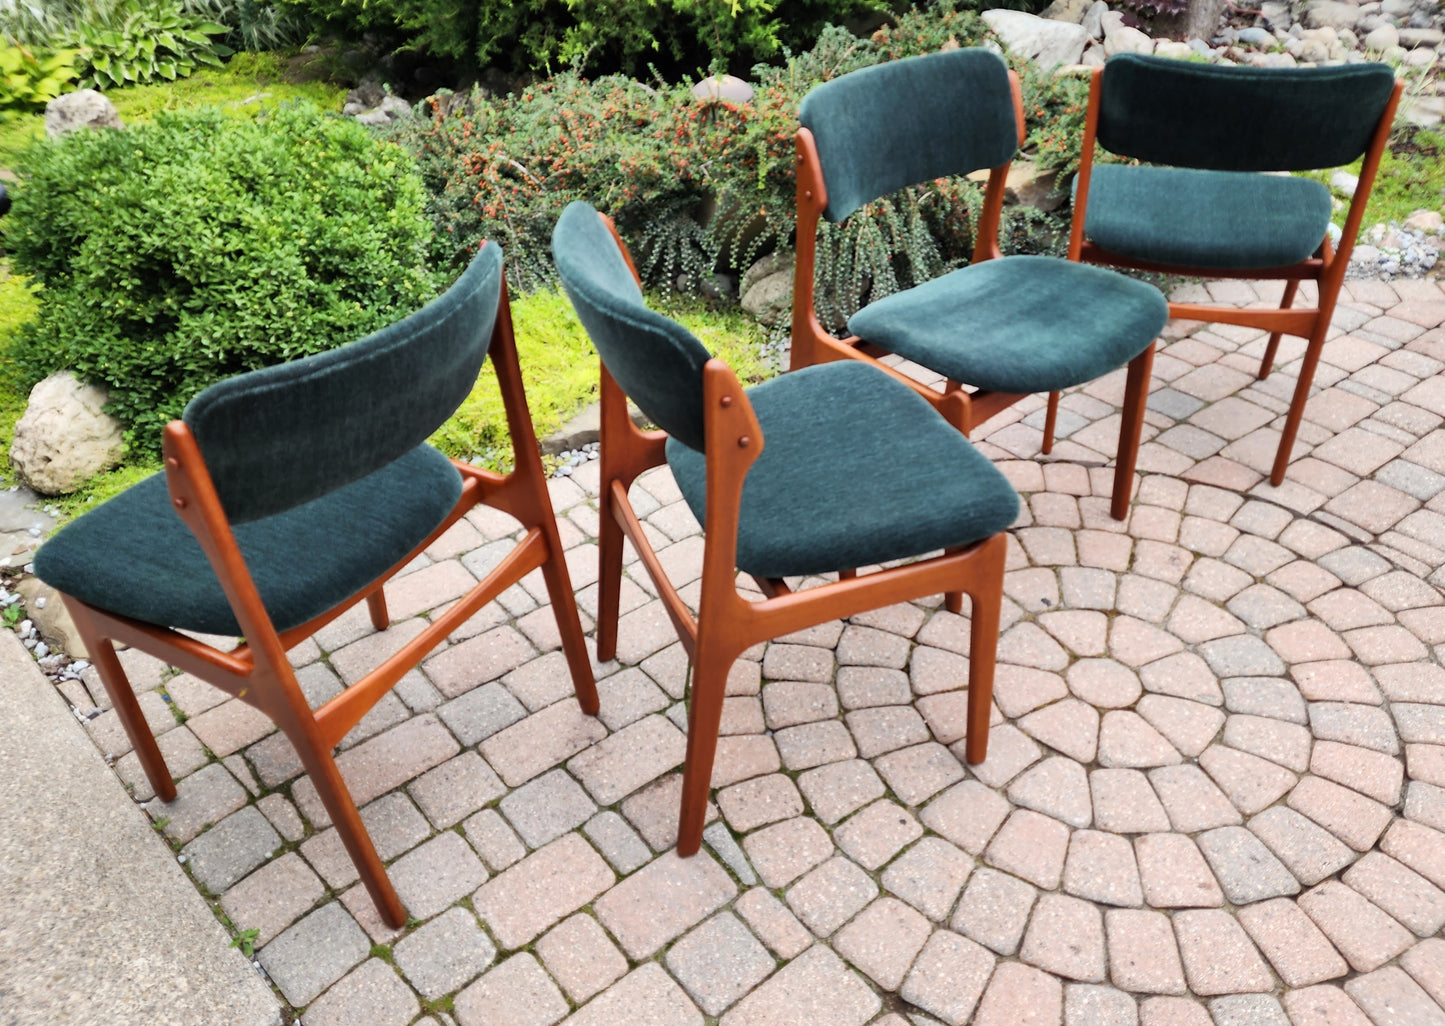 4 RESTORED REUPHOLSTERED in mohair Mid Century Modern teak chairs by Erik Buch, model 49